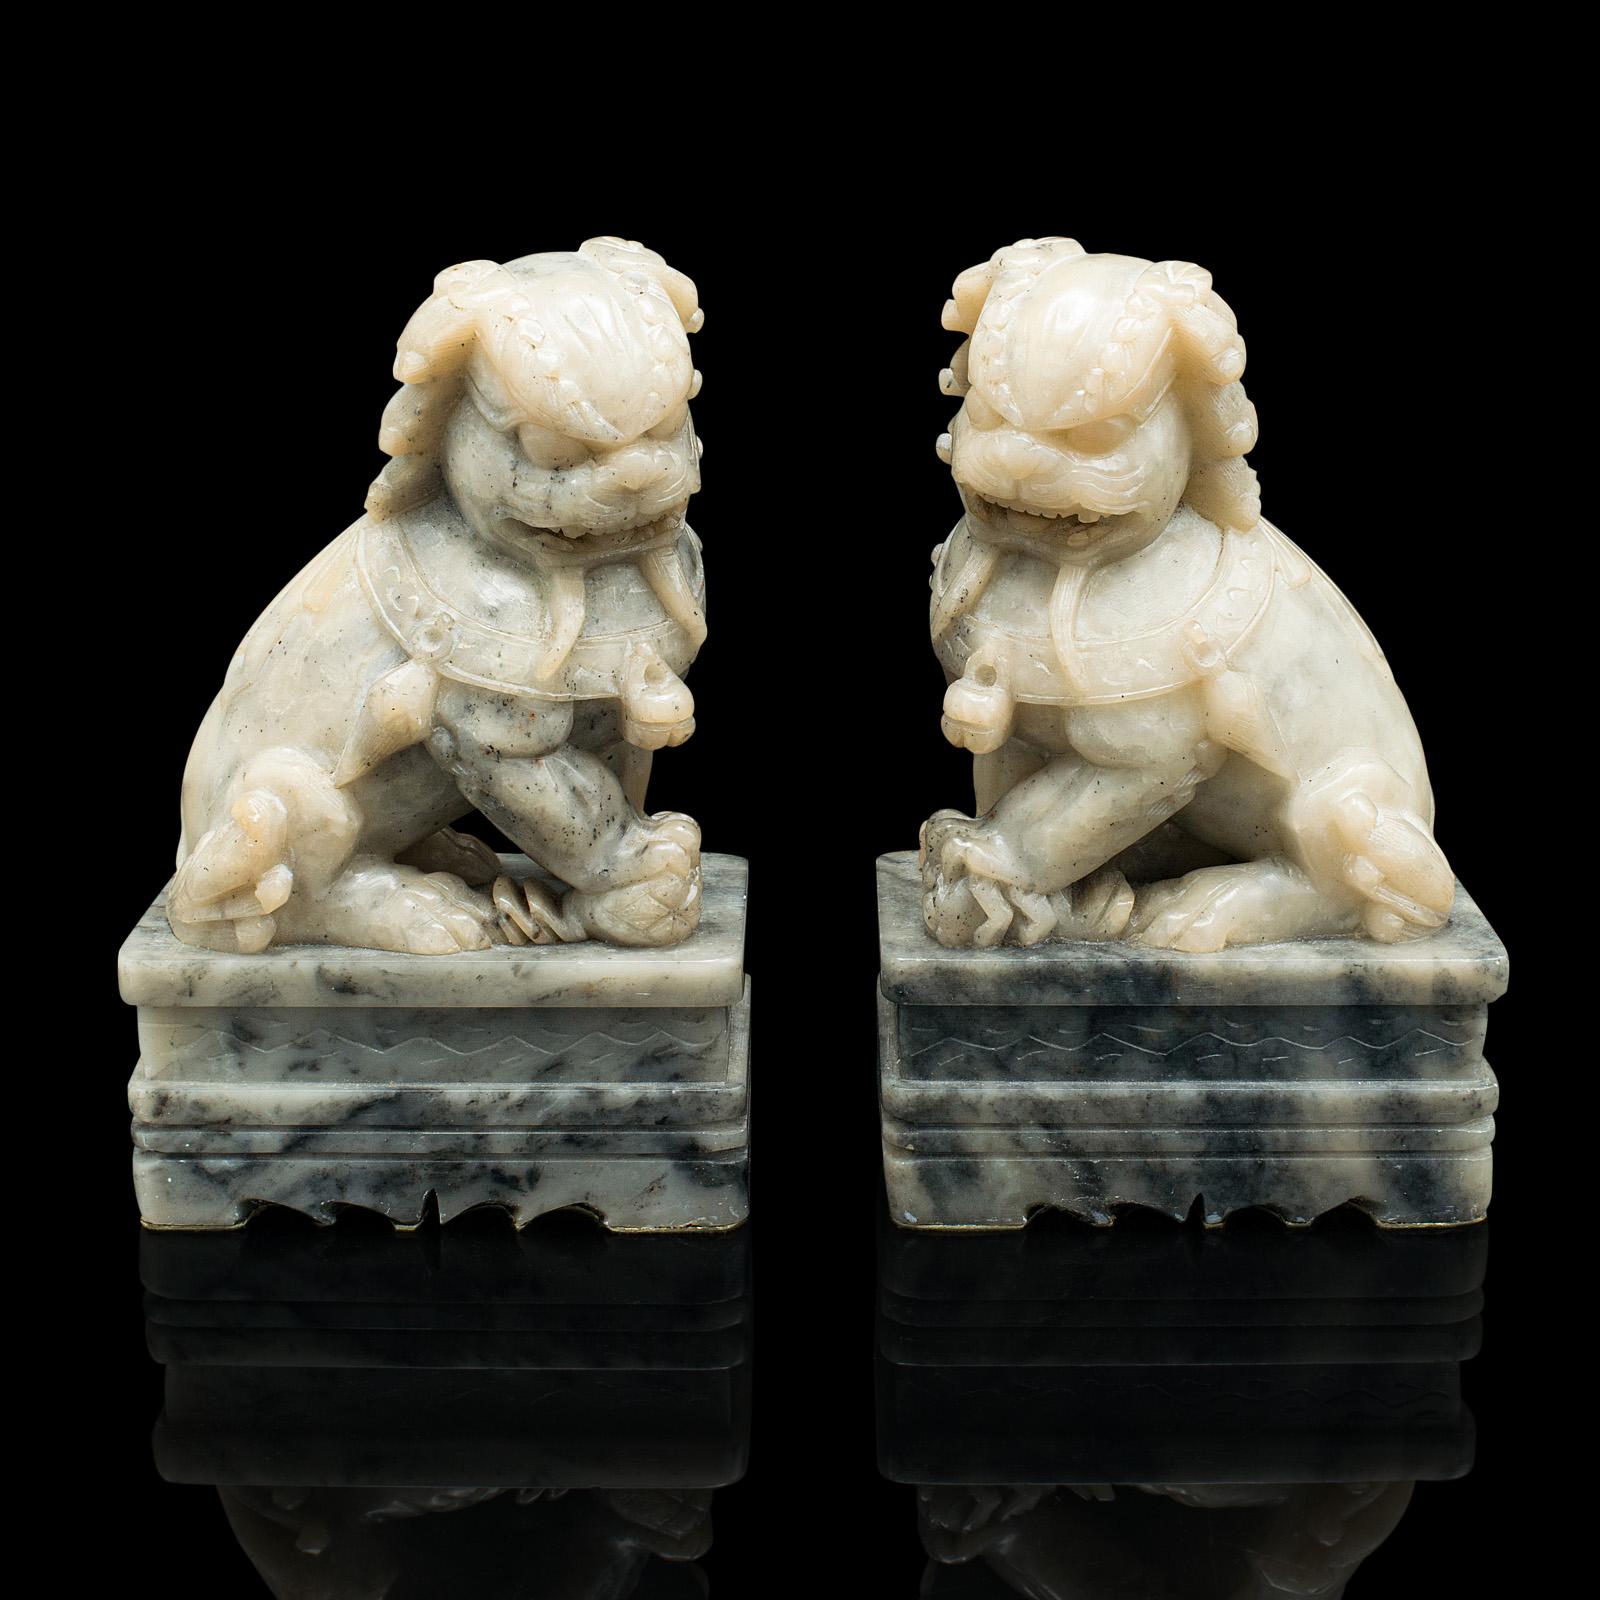 This is a pair of antique Oriental dog bookends. A Chinese, soapstone decorative 'Dog of Fo' book rest, dating to the late Victorian period, circa 1900.

Delightfully tactile dogs with a lovely natural finish and appearance
Displaying a desirable